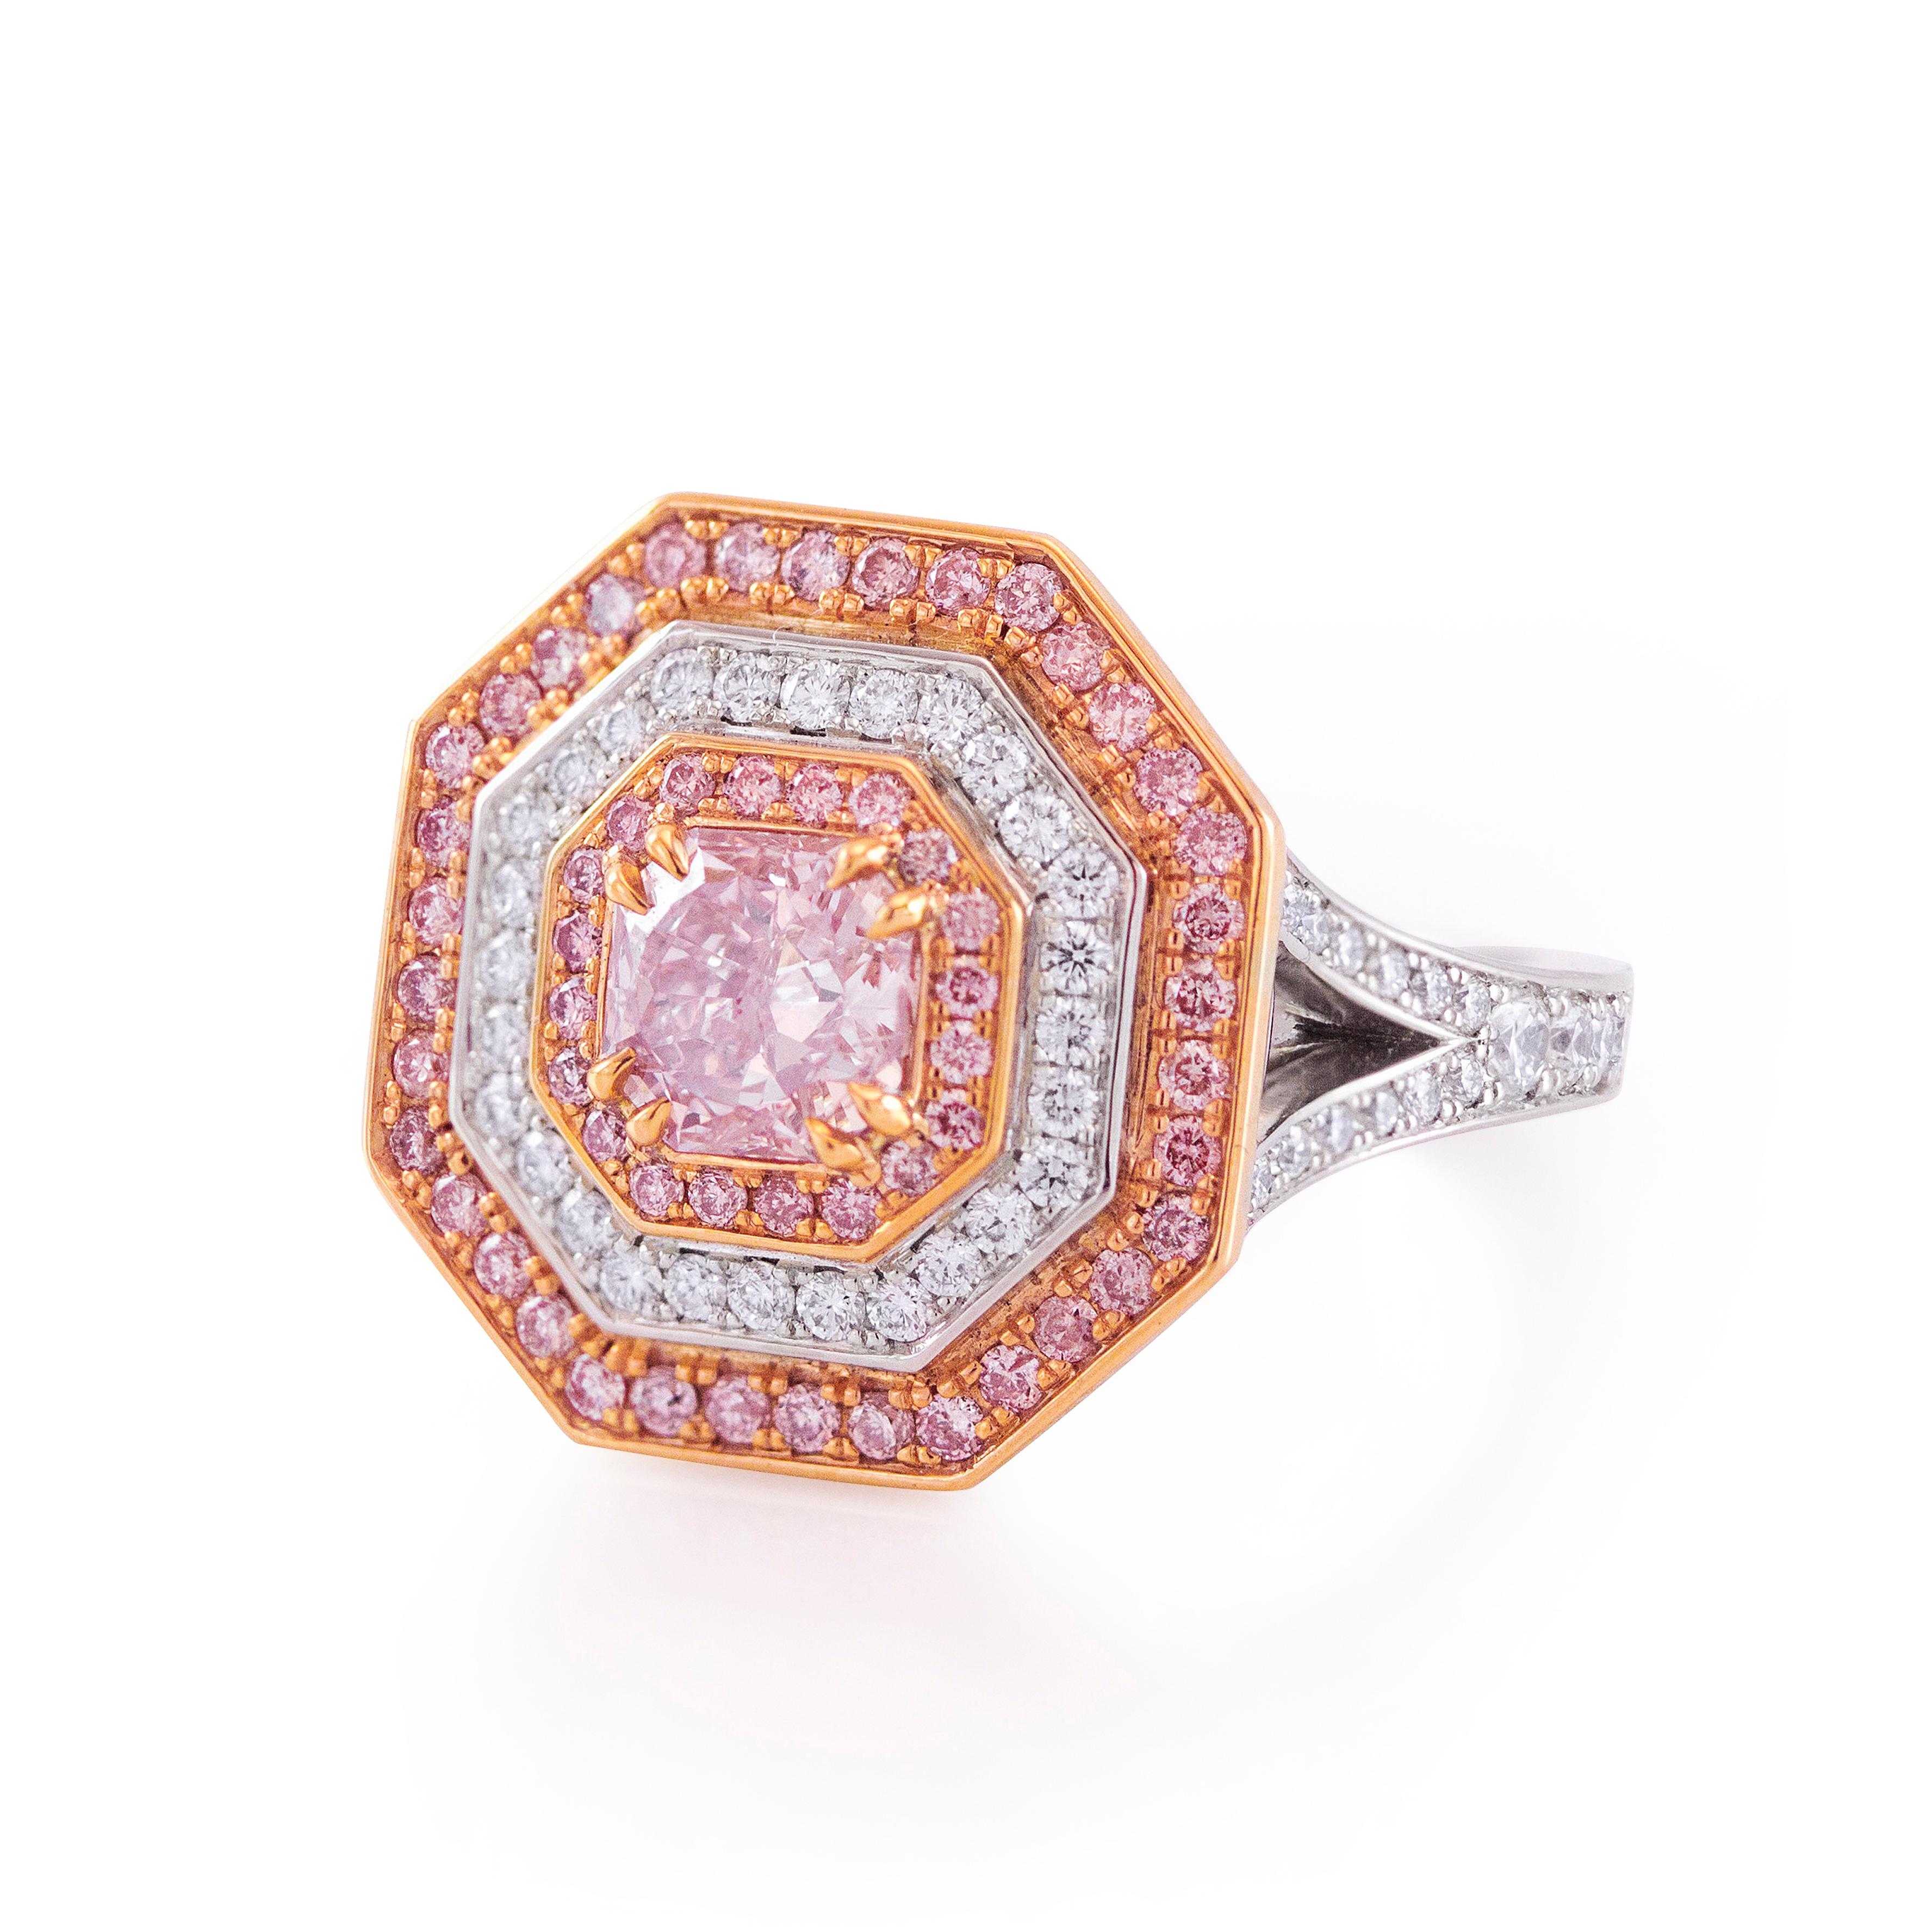 This elegant and stunning engagement ring features a 0.90 carats radiant cut diamond center stone that GIA certified as Fancy Purplish Pink color. The center stone is accented with 2 rows of round cut pink diamonds and 1 rows of white diamonds